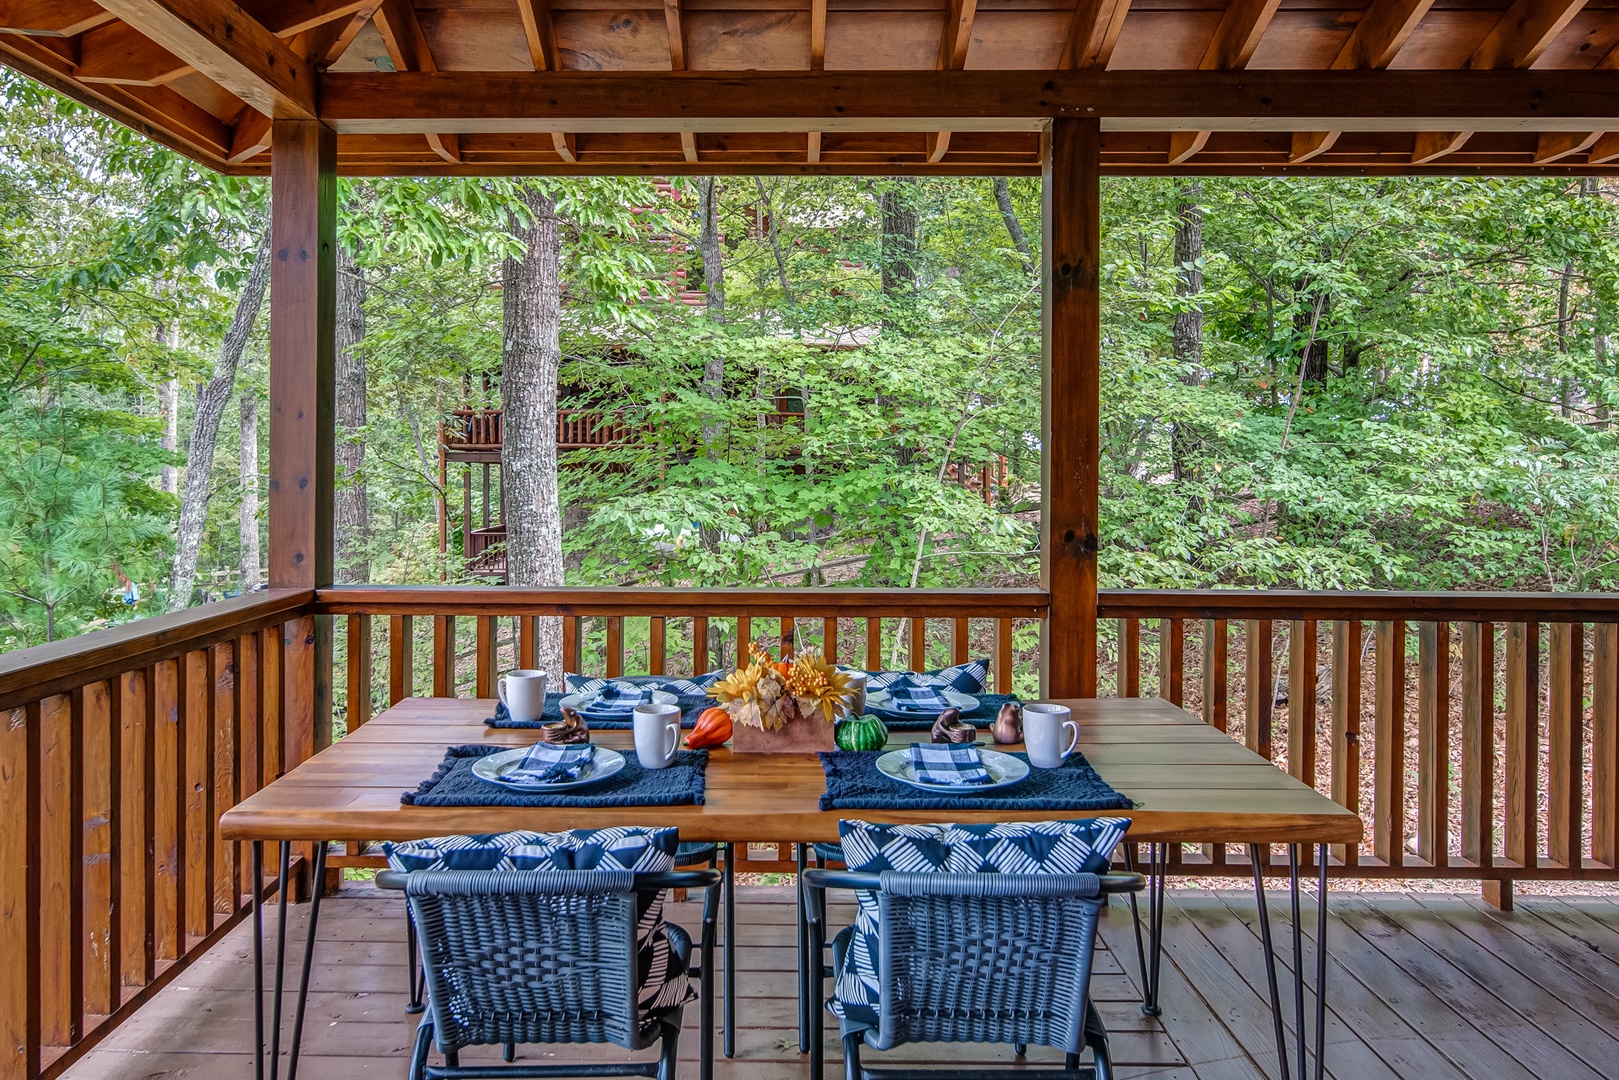 Enjoy a picnic with a view on the covered wraparound deck